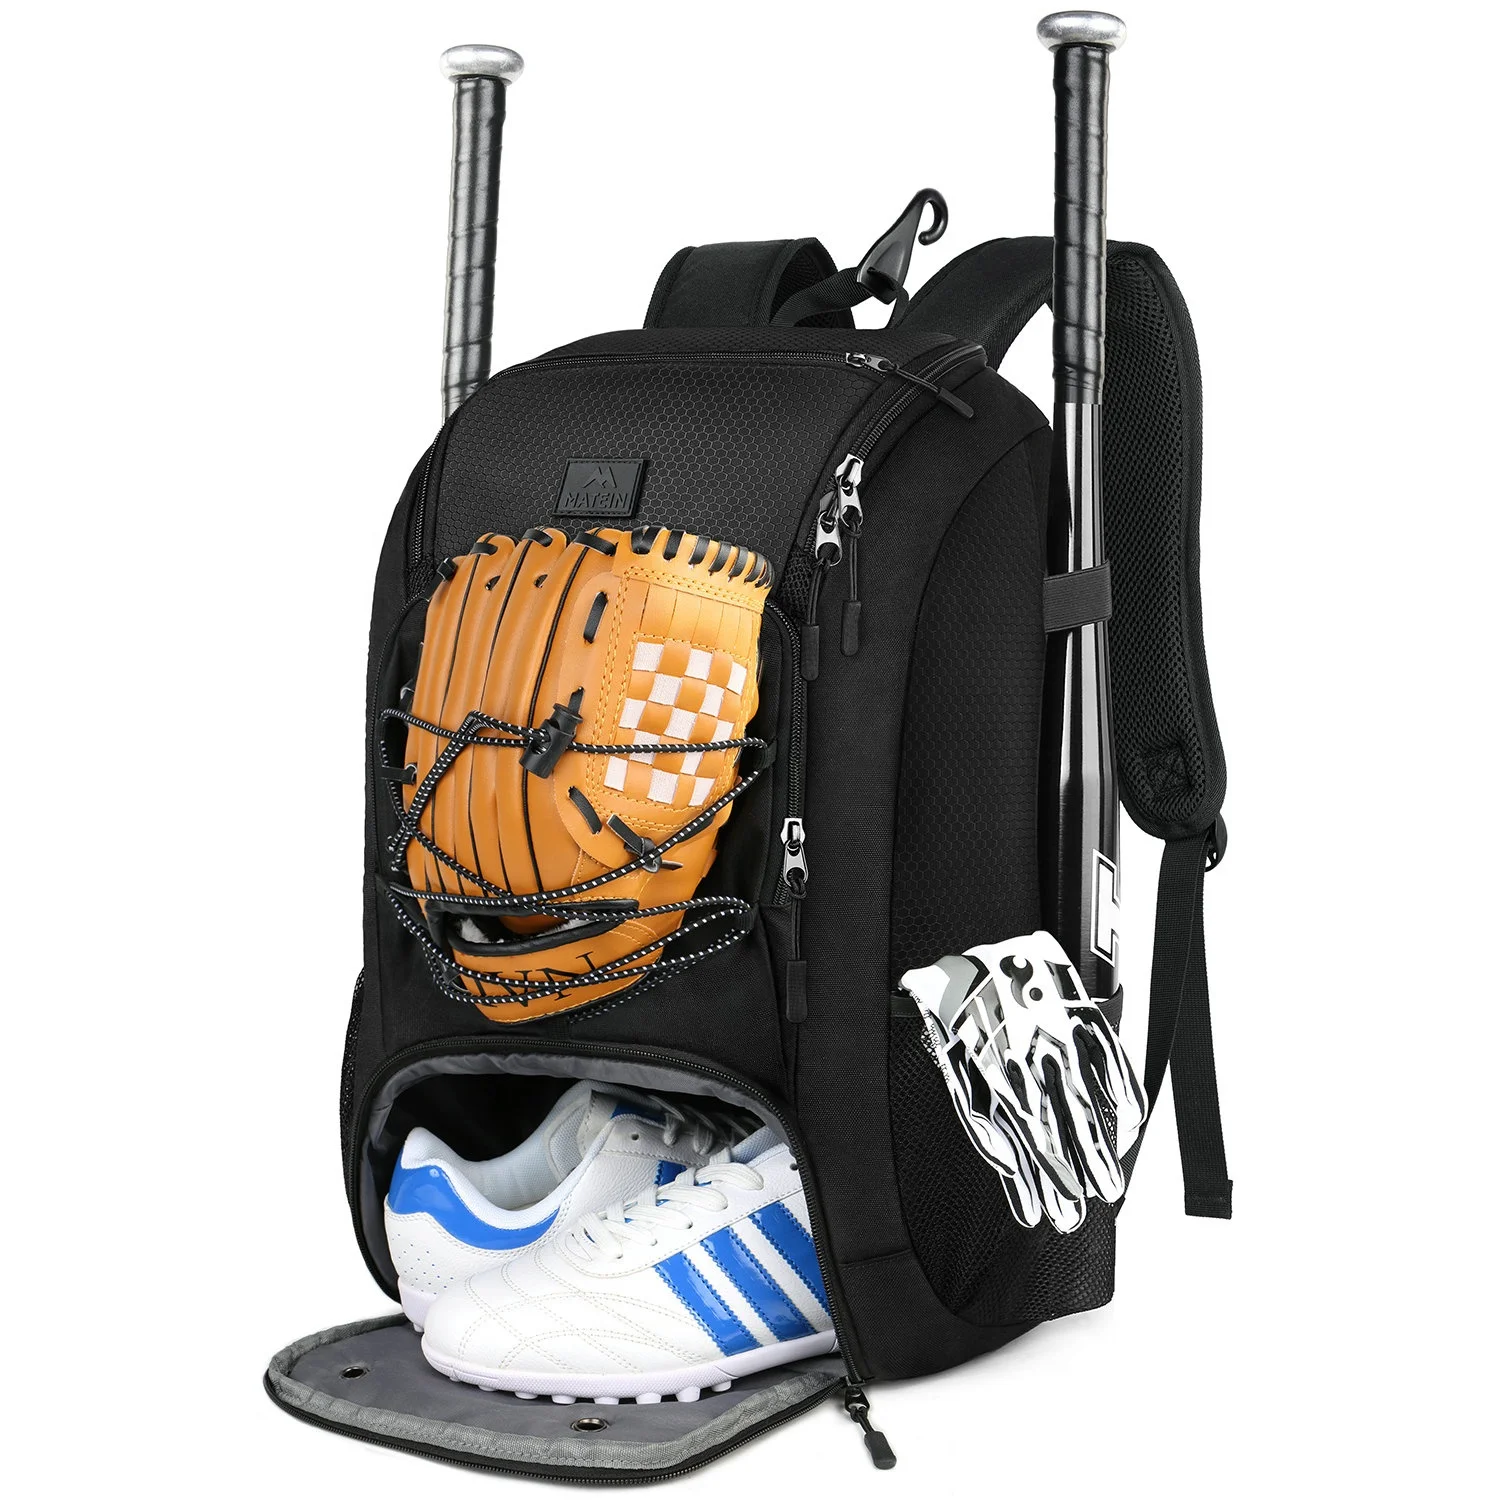 

MATEIN oxford Softball Bat Bag Baseball Backpack with Shoes Compartment for Youth Boys and Adult backpack outdoor travel sport, Customized color